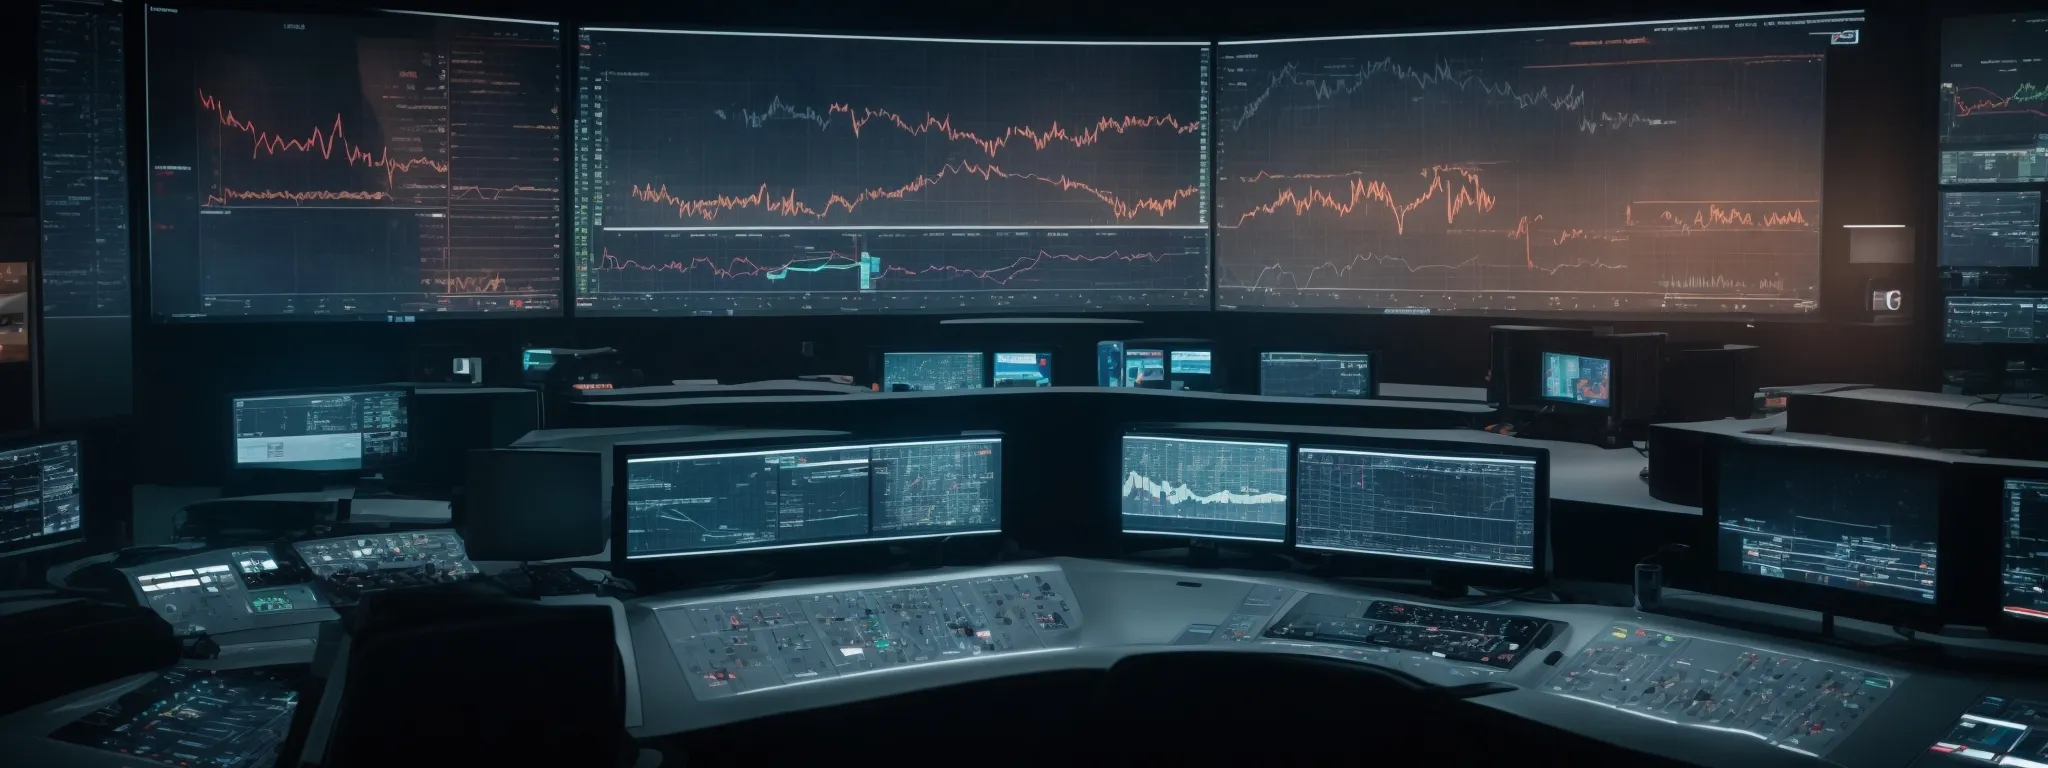 a futuristic control room with screens displaying data analytics and graphs indicating search engine performance trends.